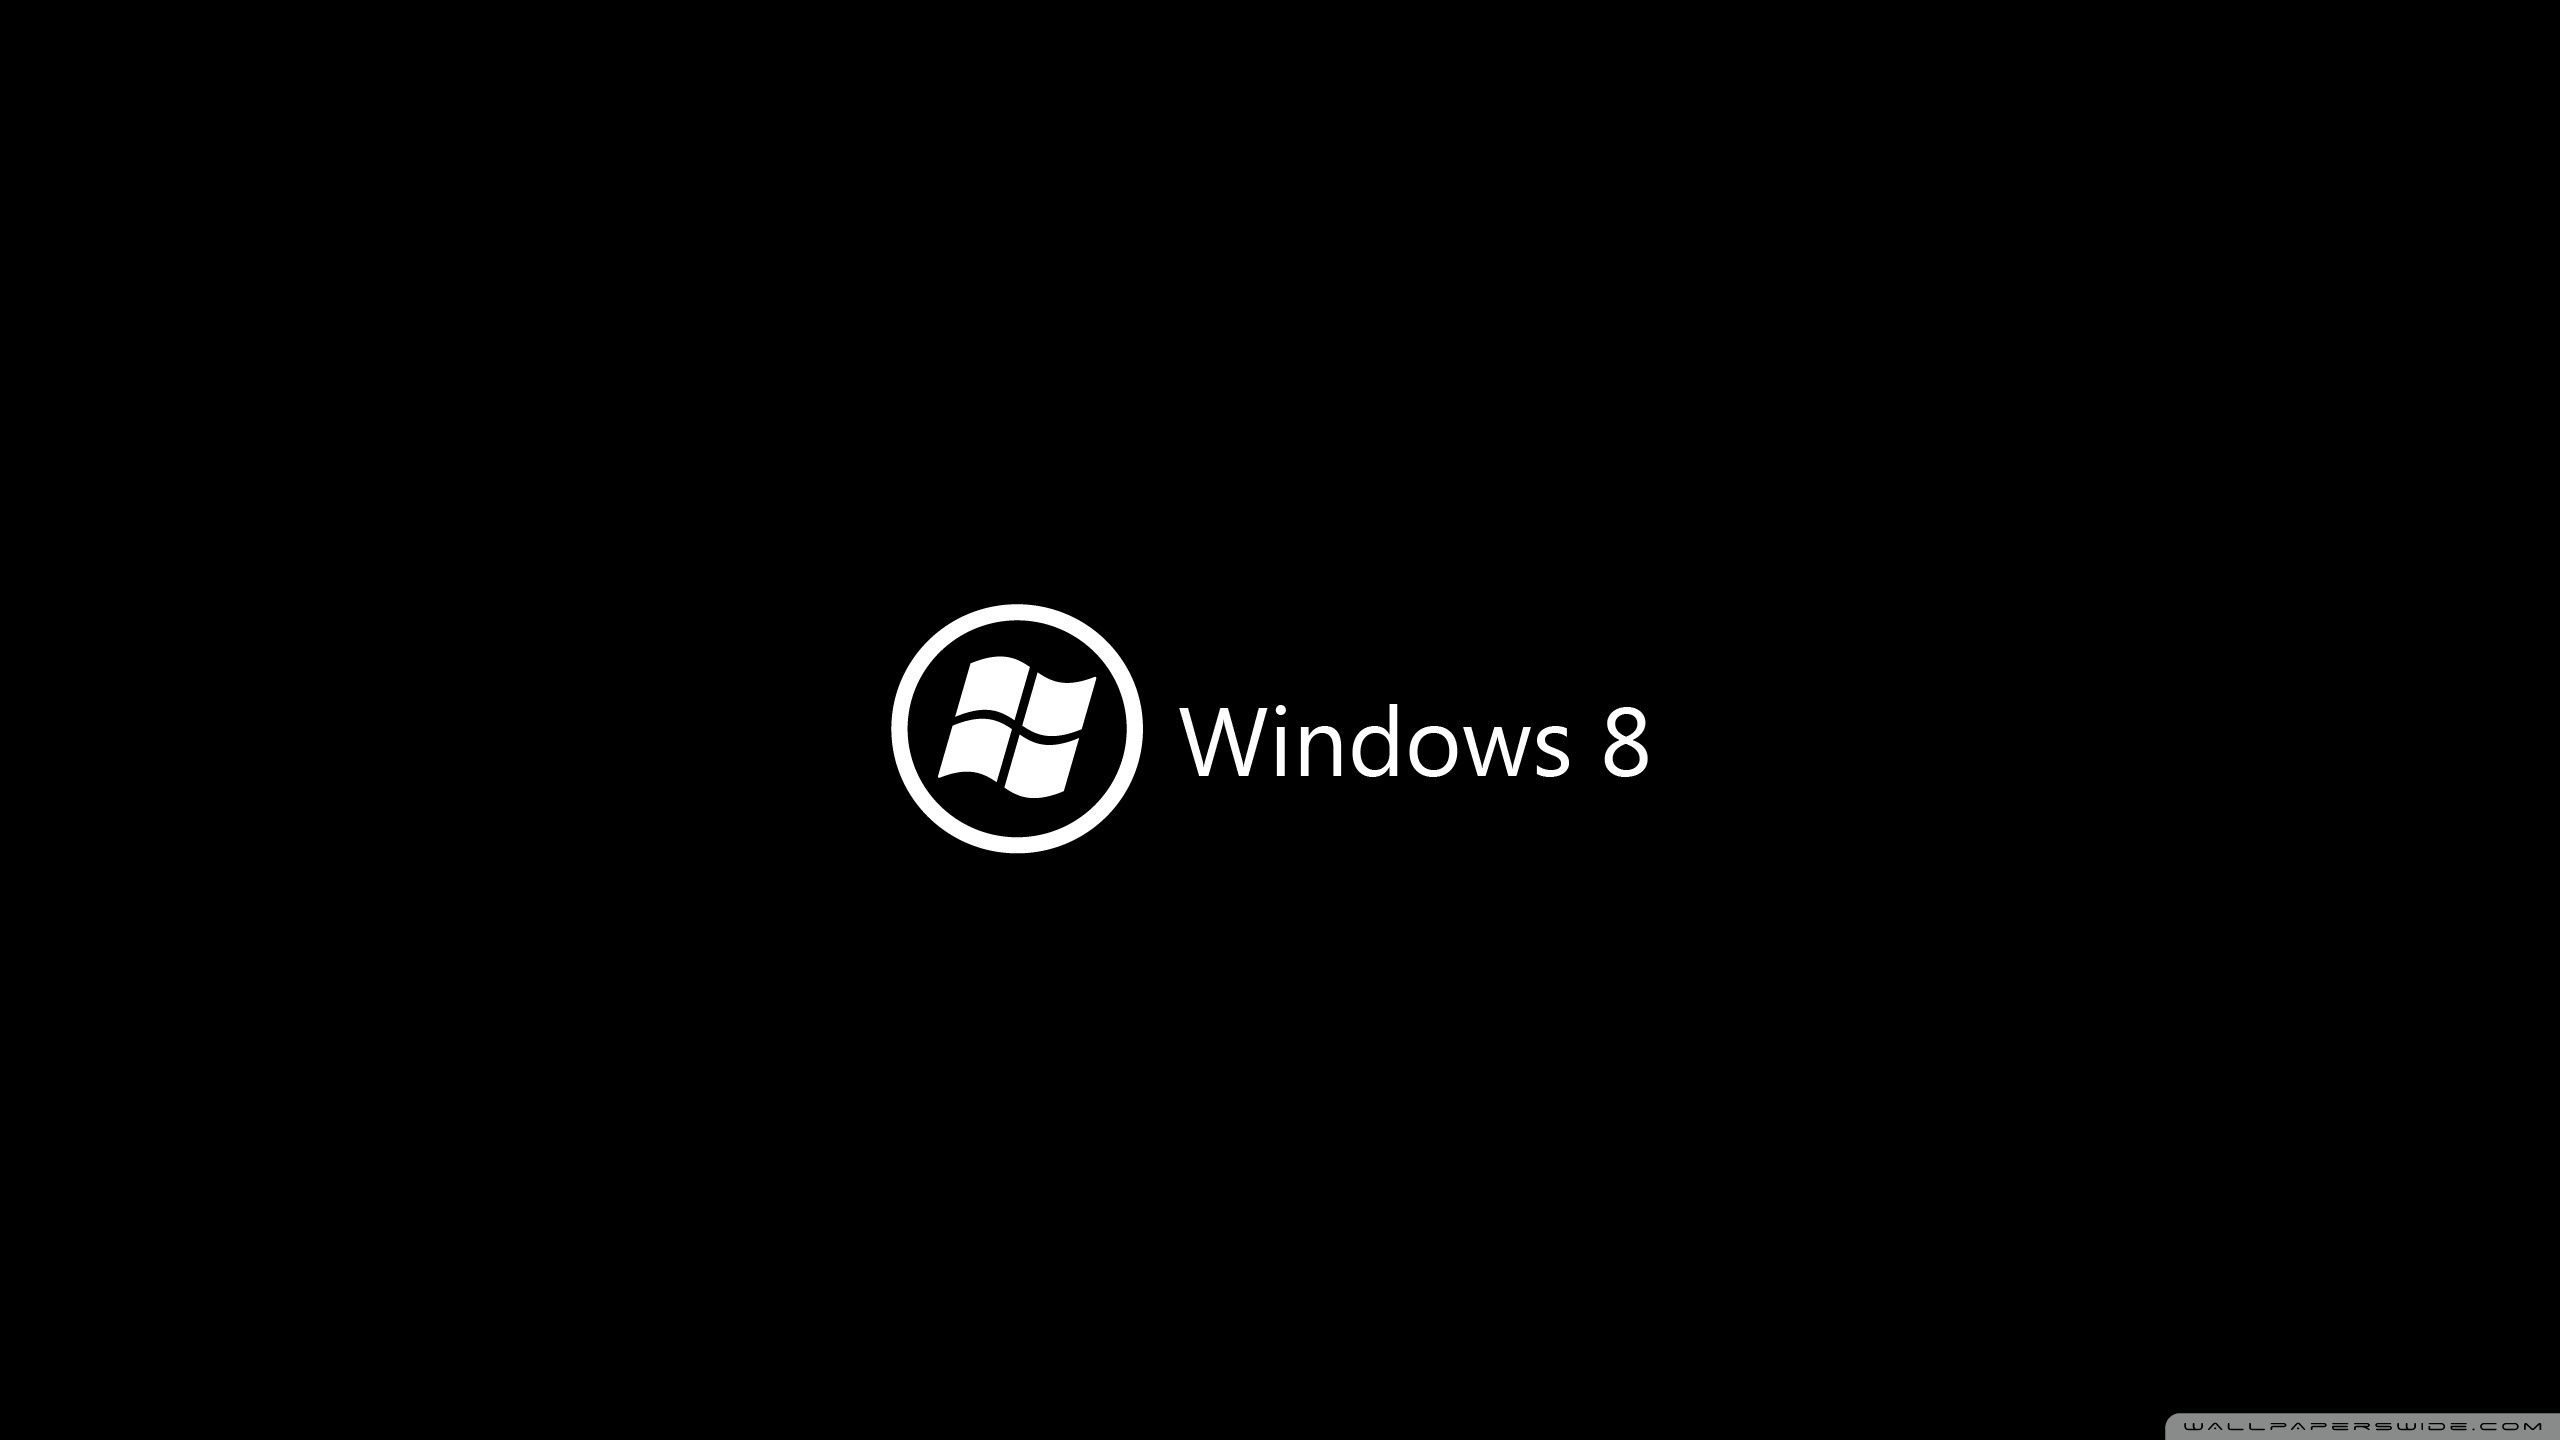 Windows 8 black minmal theme wallpapers and images - wallpapers ...